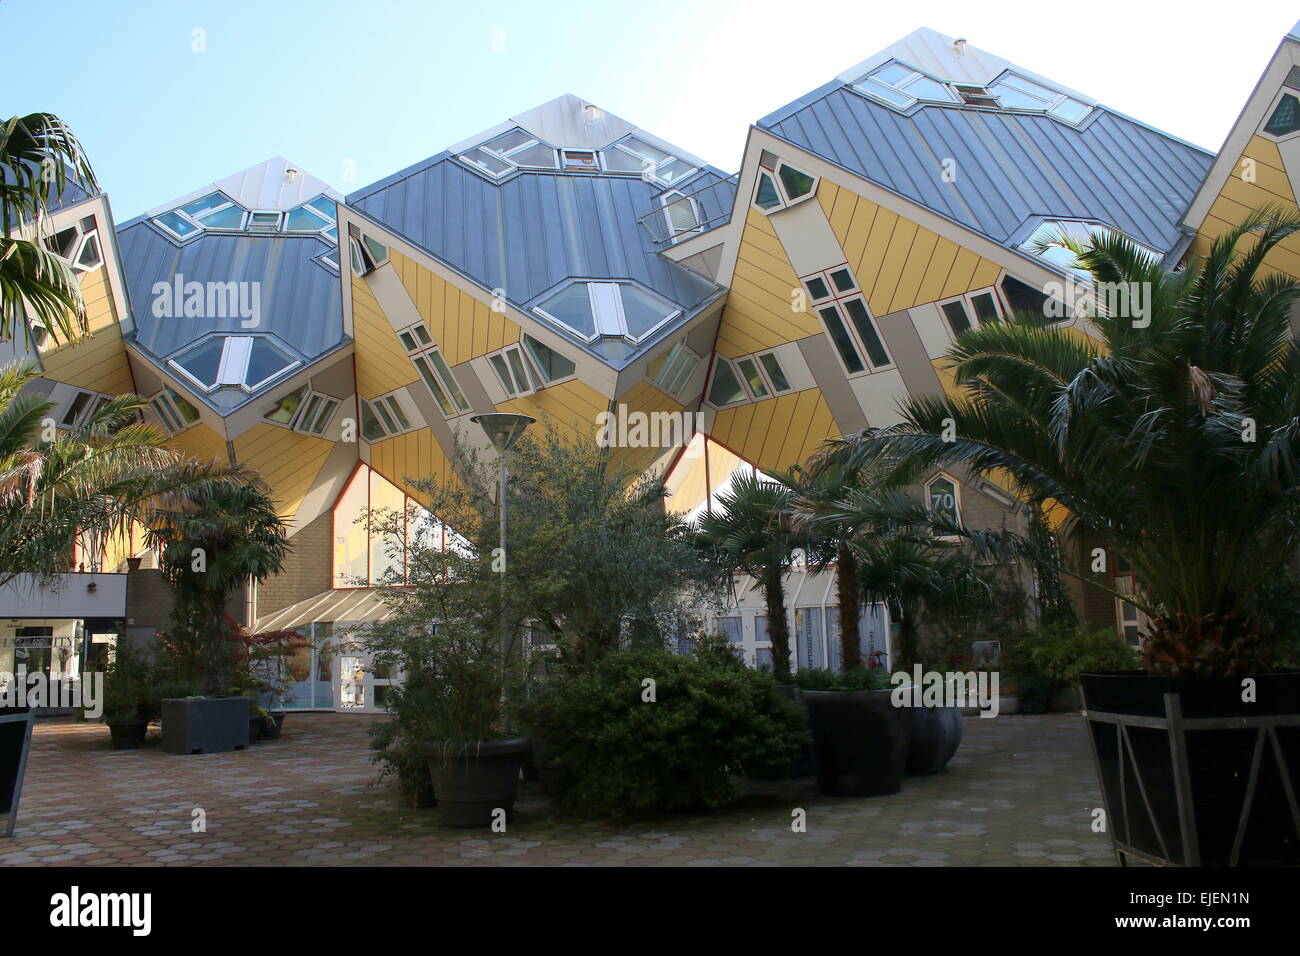 Kubuswoningen or Cube Houses from the 1970s in Rotterdam, The Netherlands, designed by Dutch architect  Piet Blom Stock Photo